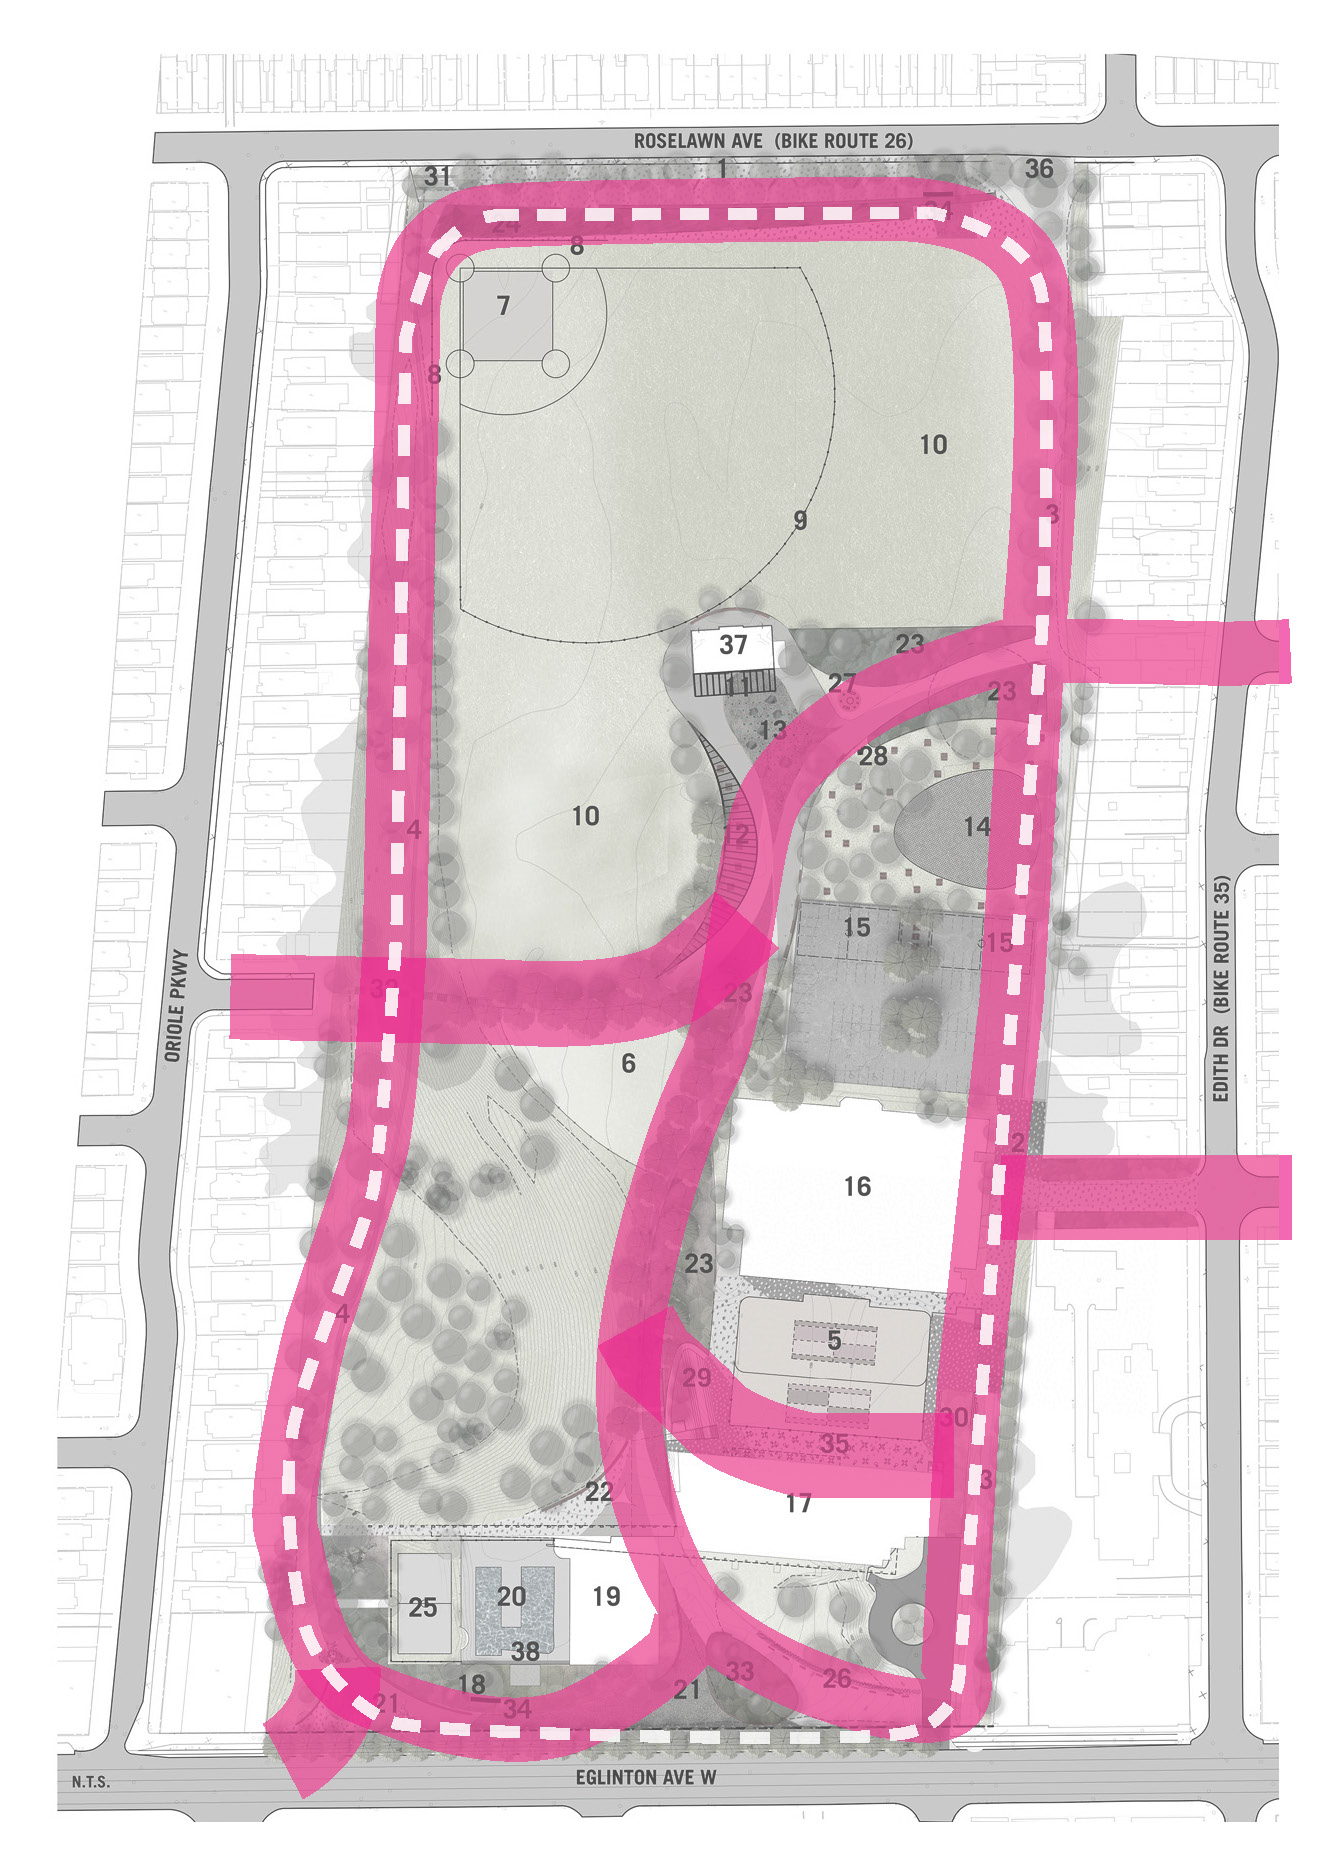 An aerial map of Eglinton Park showing the pathways improvements identified in the Master Plan in pink. A path connects around the perimeter of the park. A curved pathway connects the west side from Oriole Parkway to the east of Edith Drive. A pathway connect Eglinton Avenue to the east and west side of the park. 